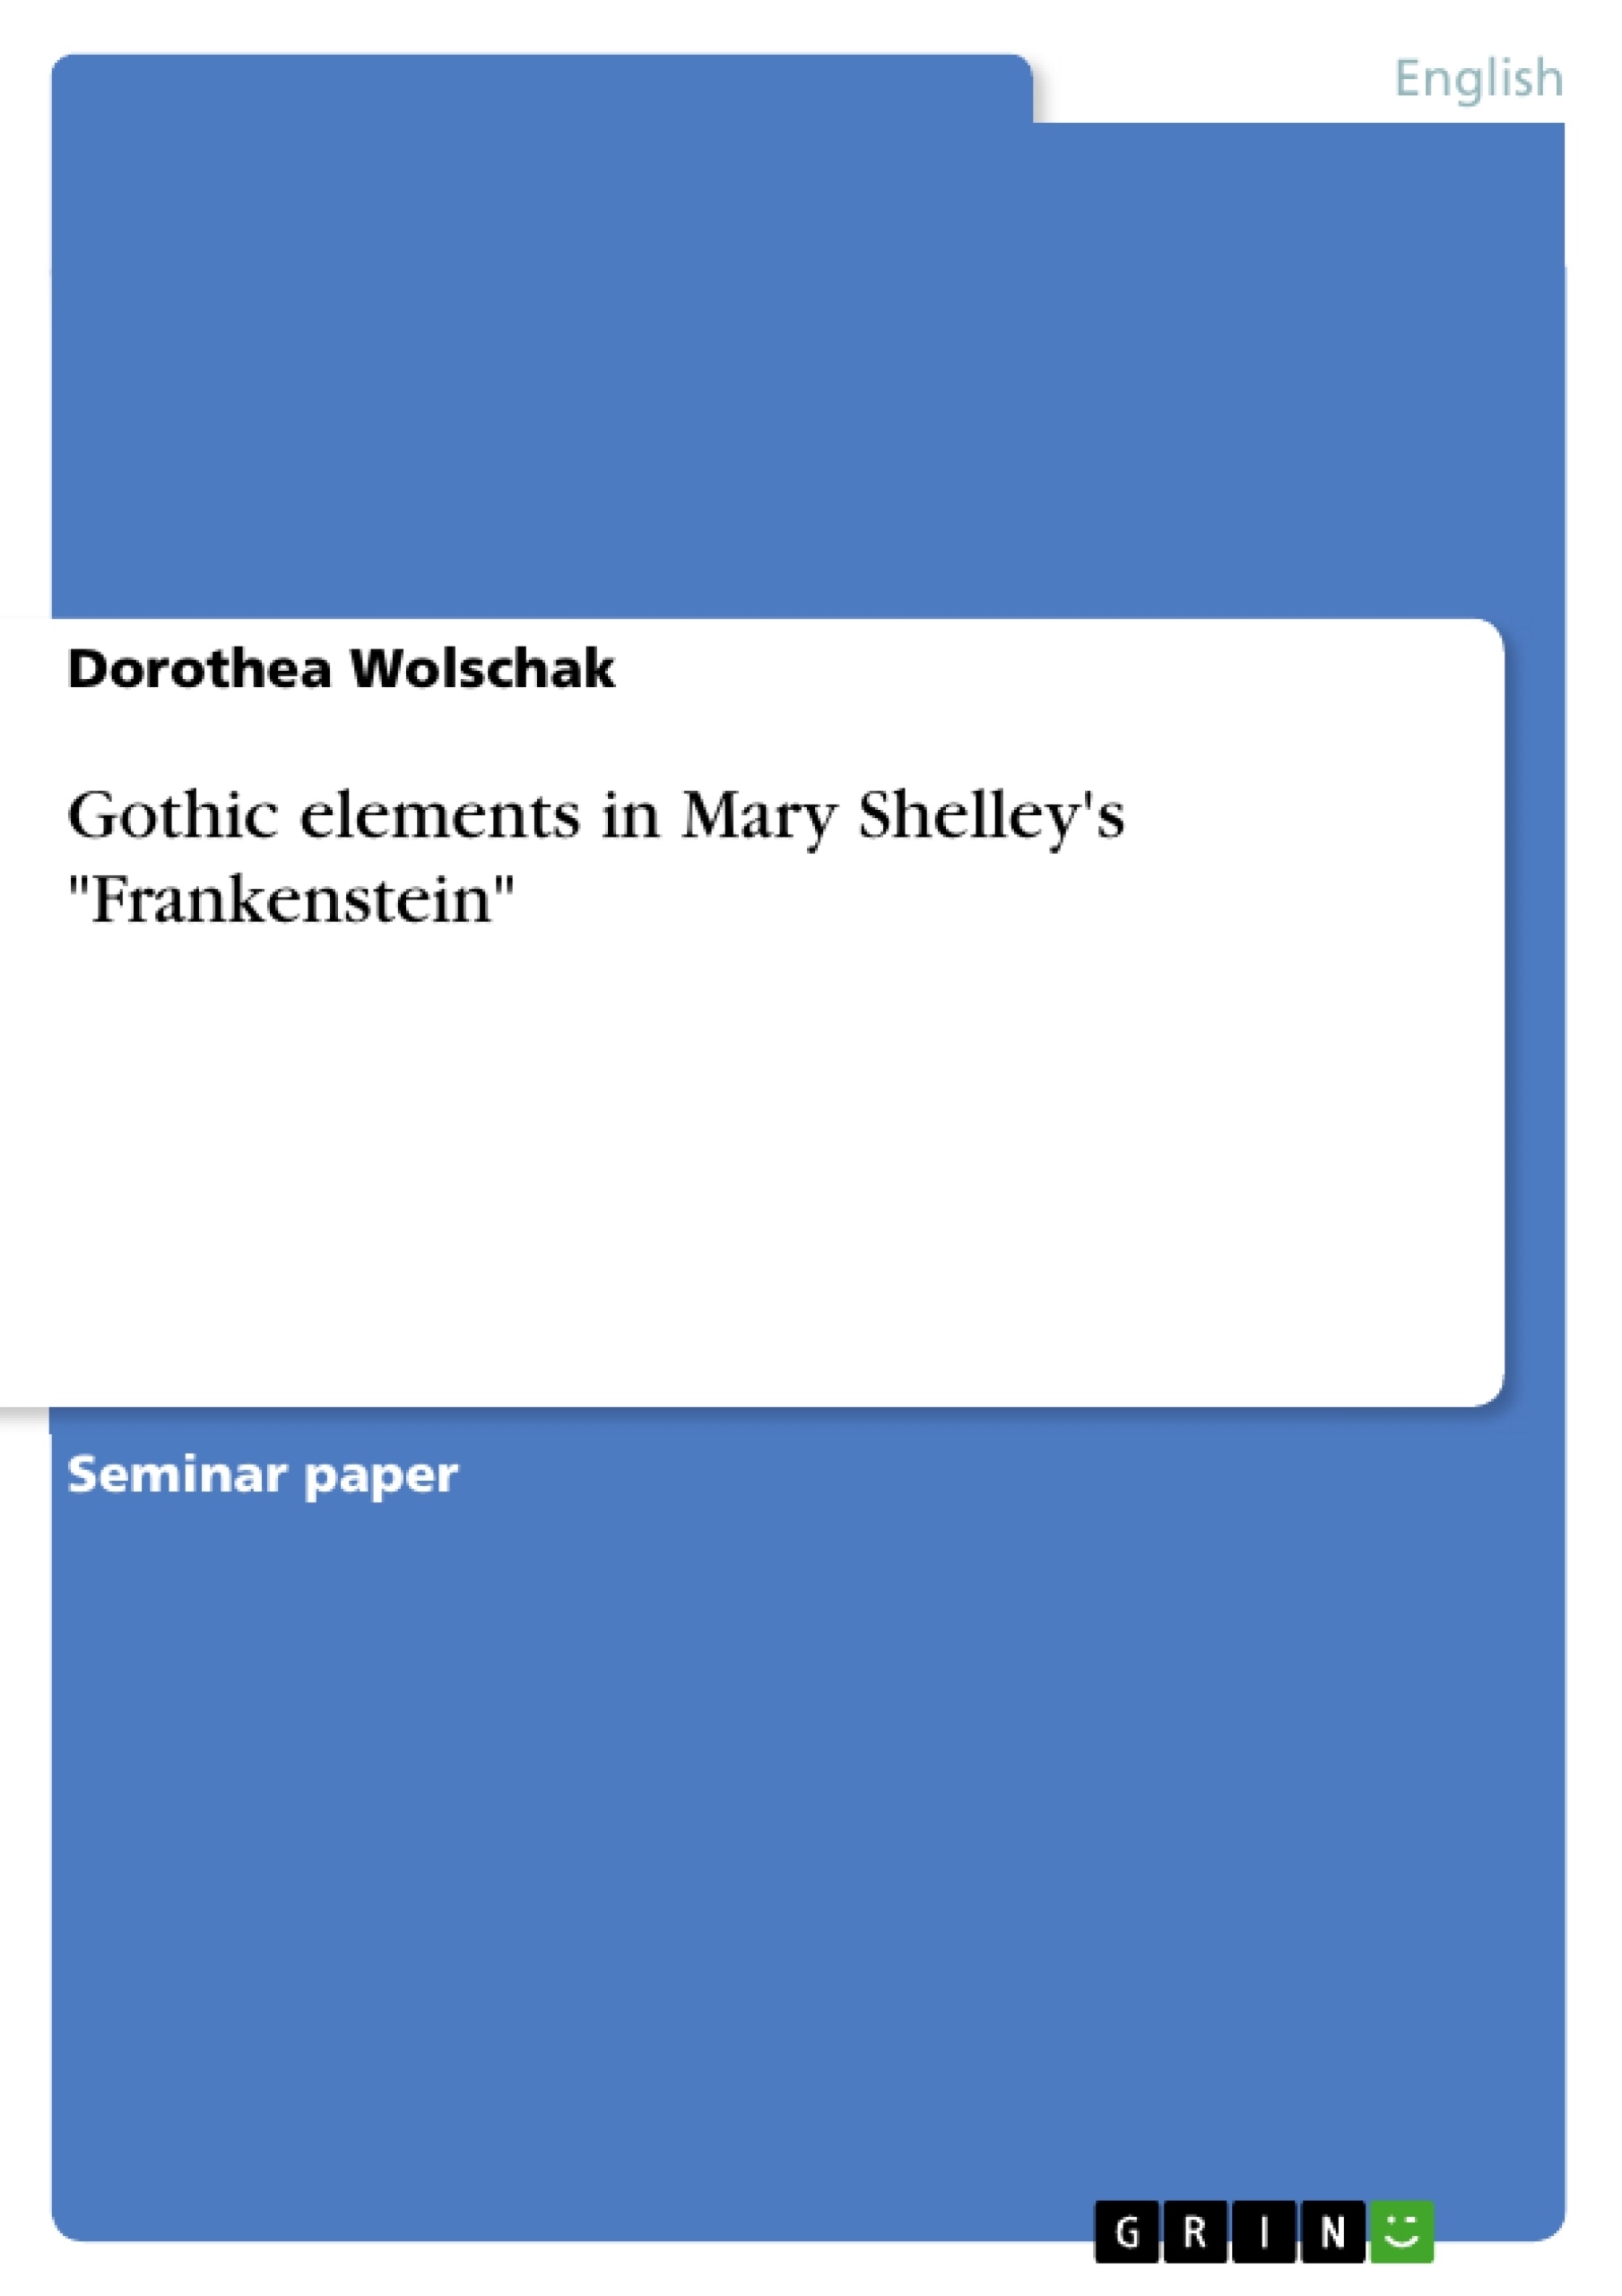 Titre: Gothic elements in Mary Shelley's "Frankenstein"